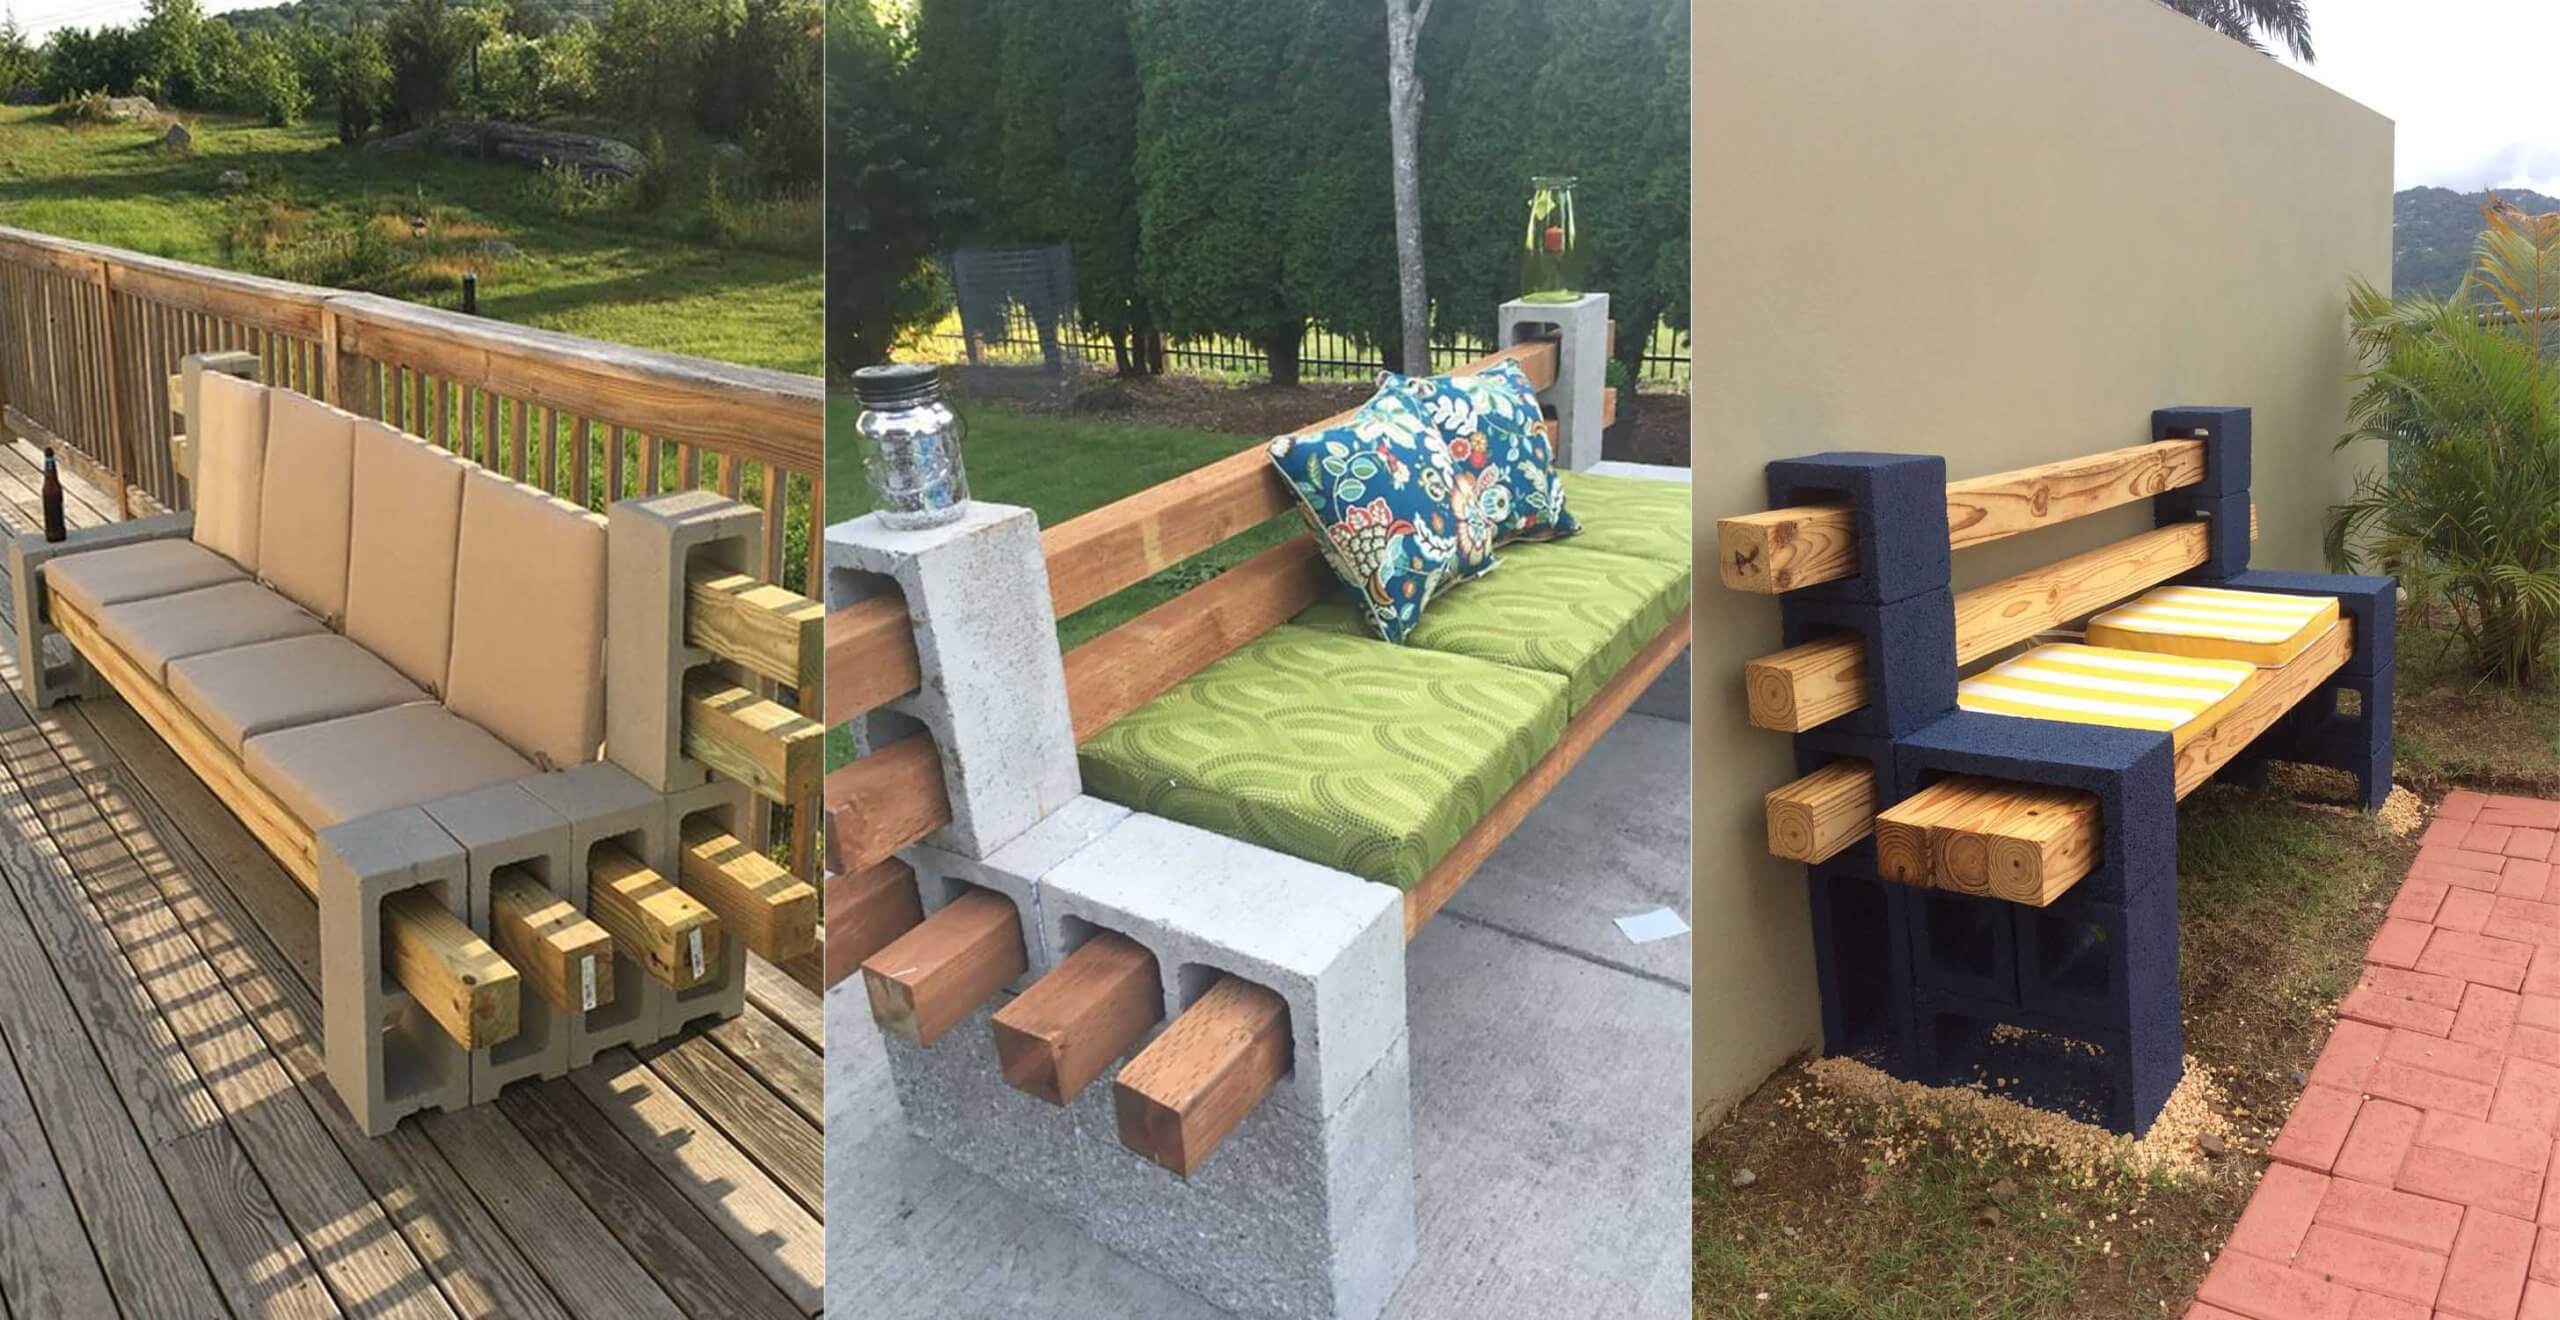 How to make an easy DIY cinder block bench